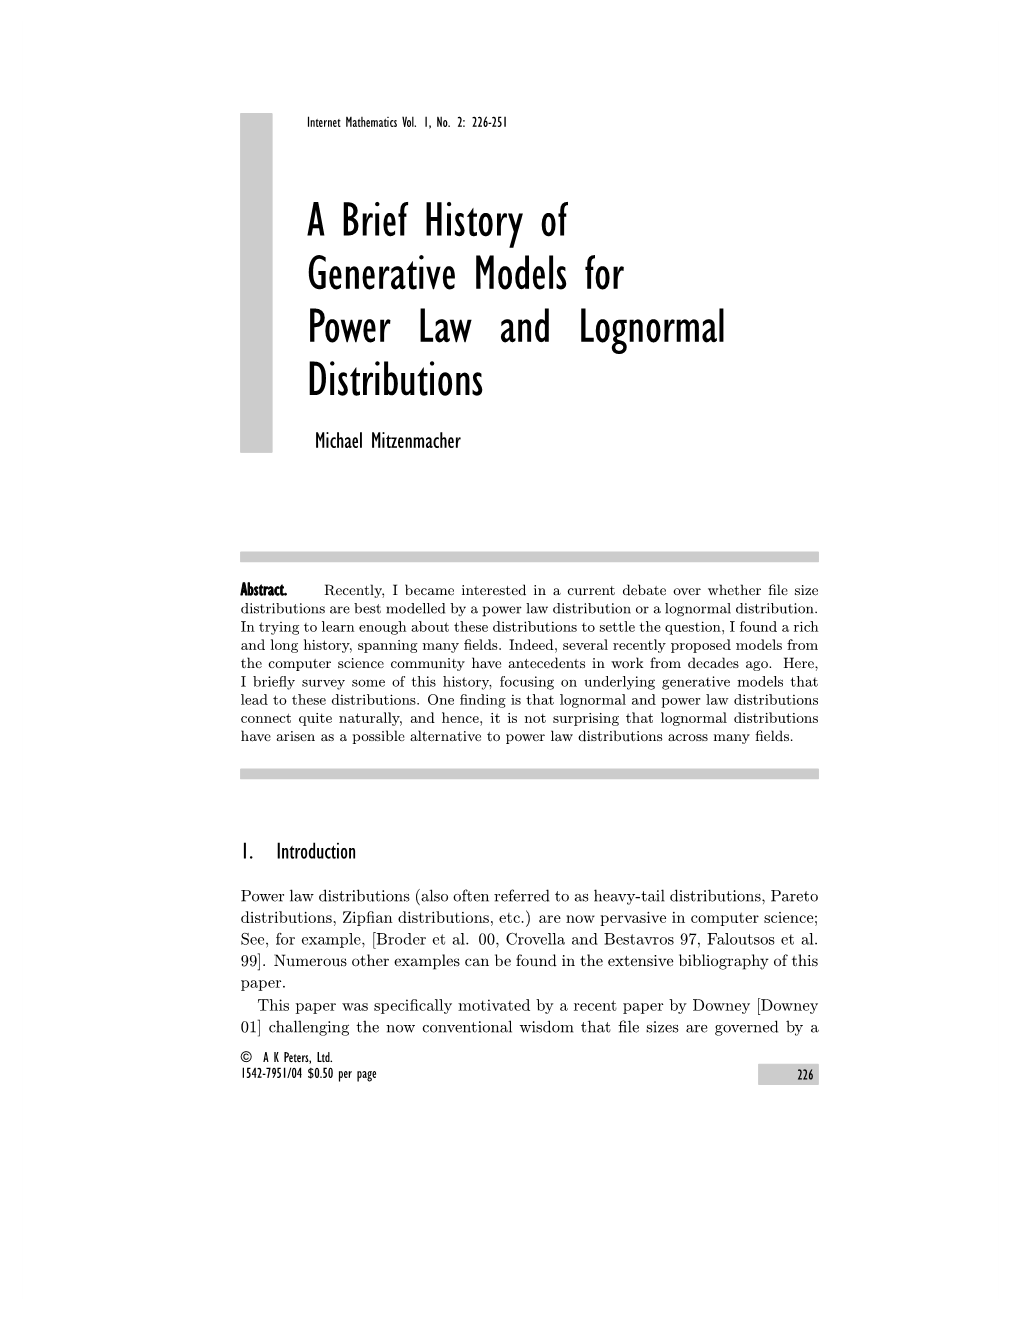 A Brief History of Generative Models for Power Law and Lognormal Distributions Michael Mitzenmacher